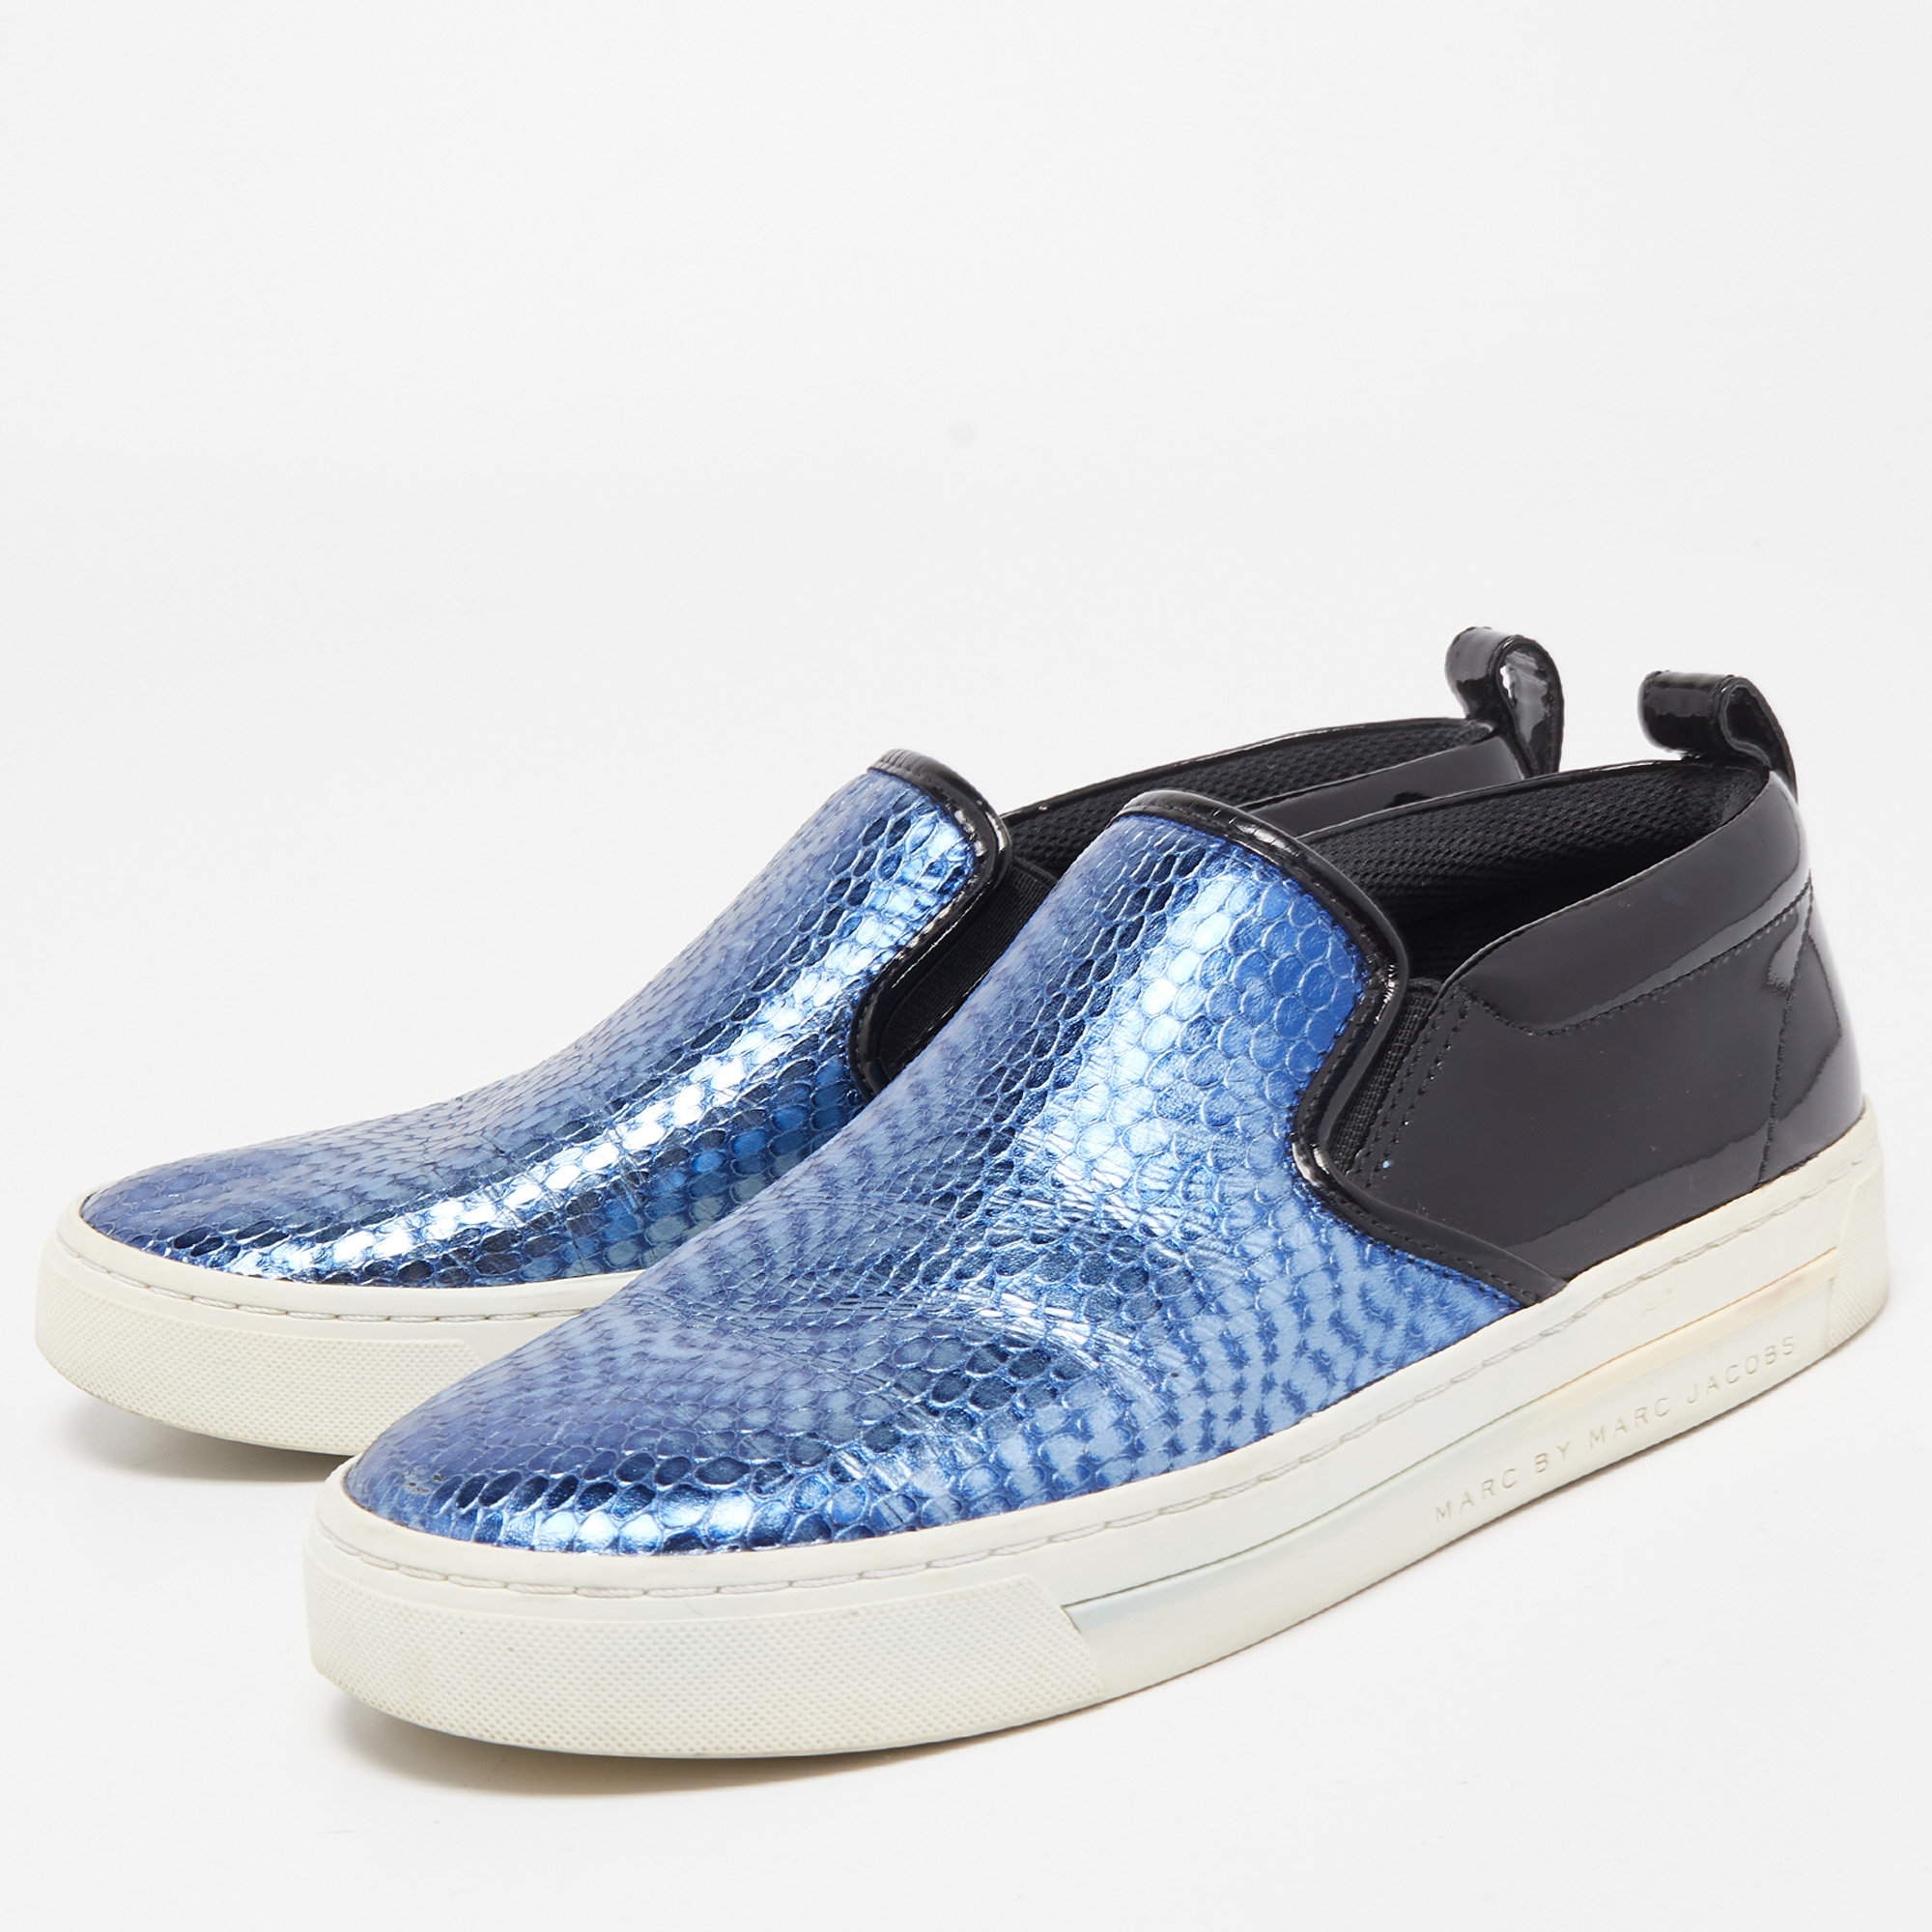 

Marc by Marc Jacobs Blue/Black Patent and Python Embossed Leather Broome Sneakers Size